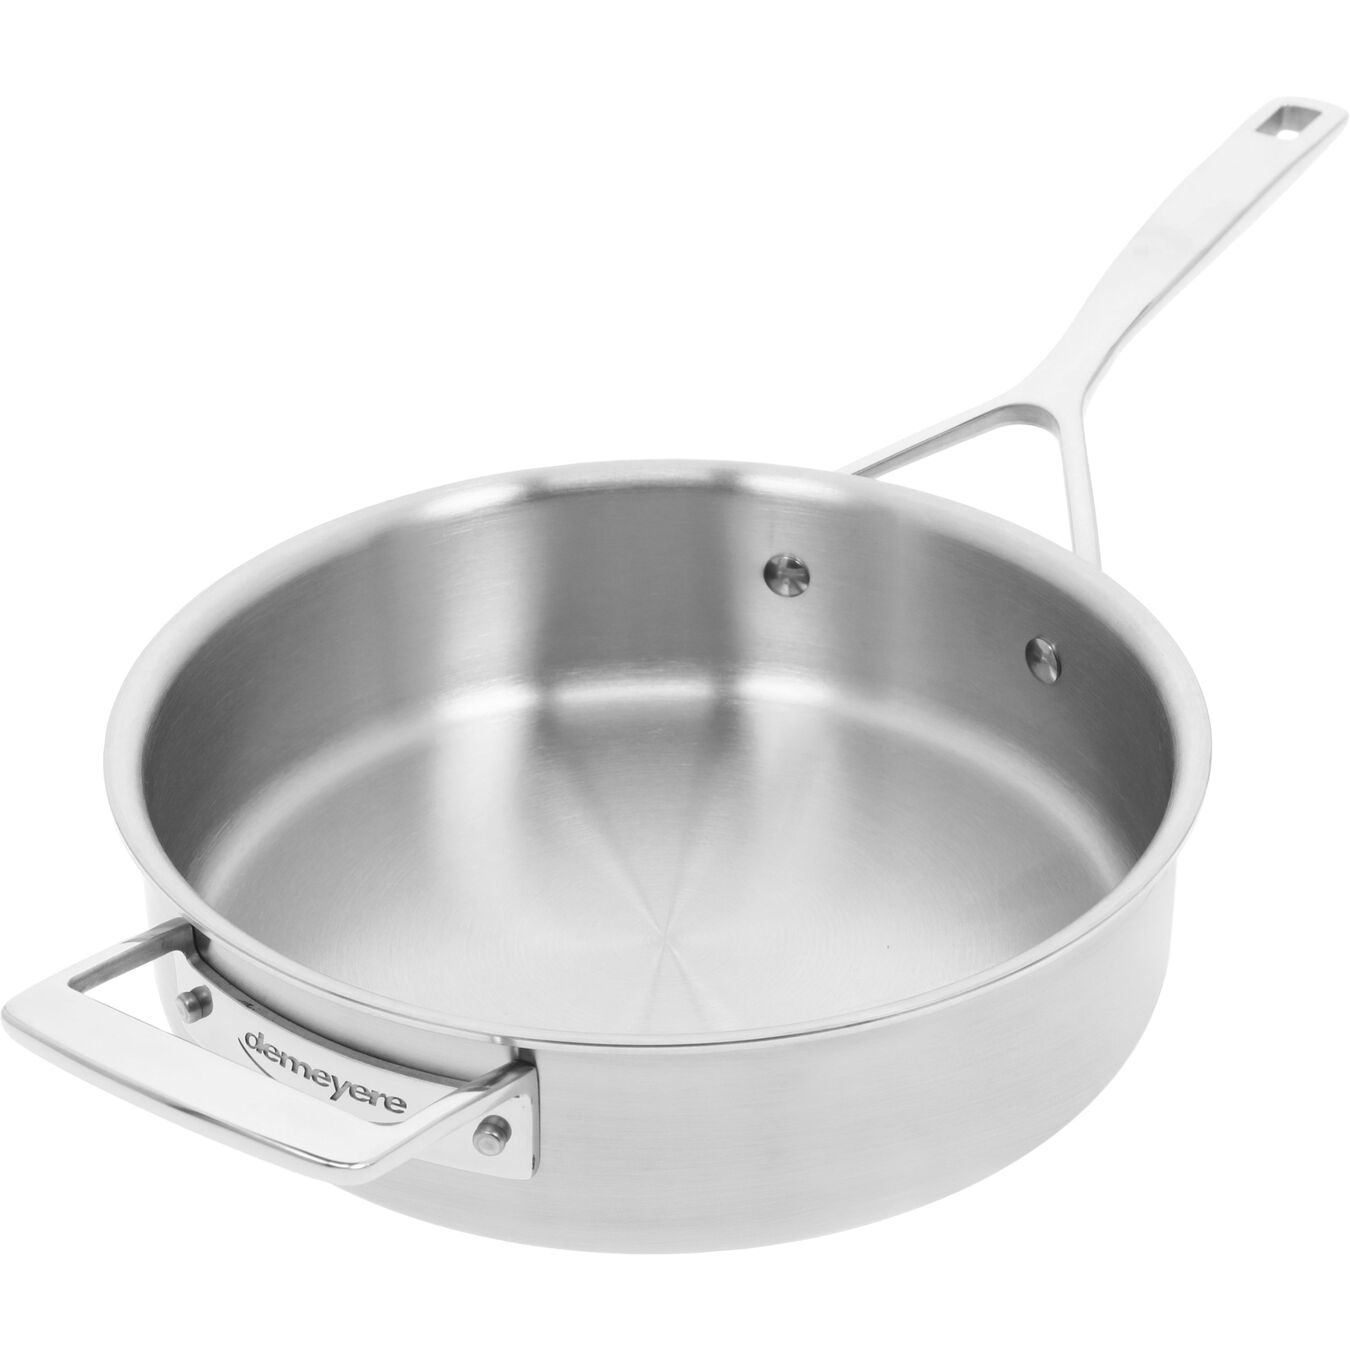 24 cm 18/10 Stainless Steel Saute pan,,large 4